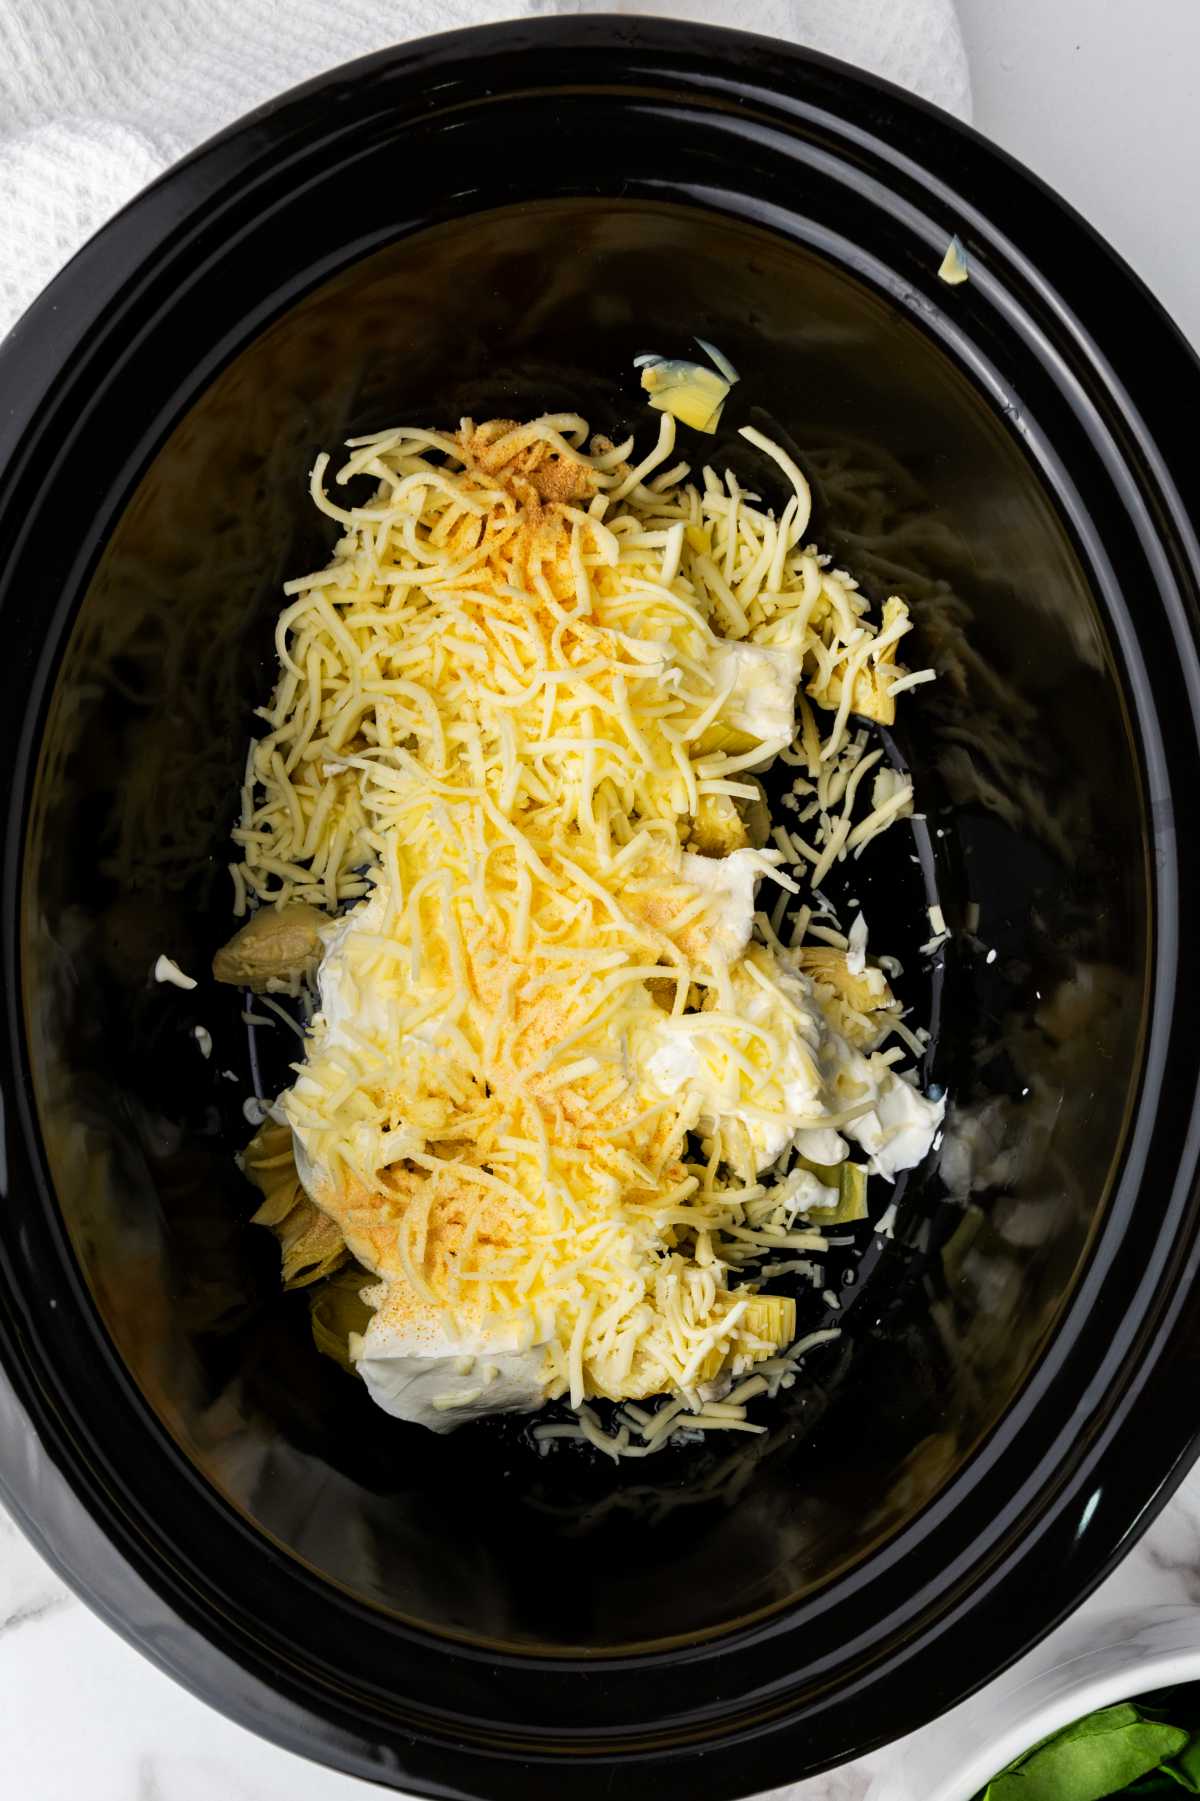 shredded cheese and seasonings added to cream cheese in a crockpot.